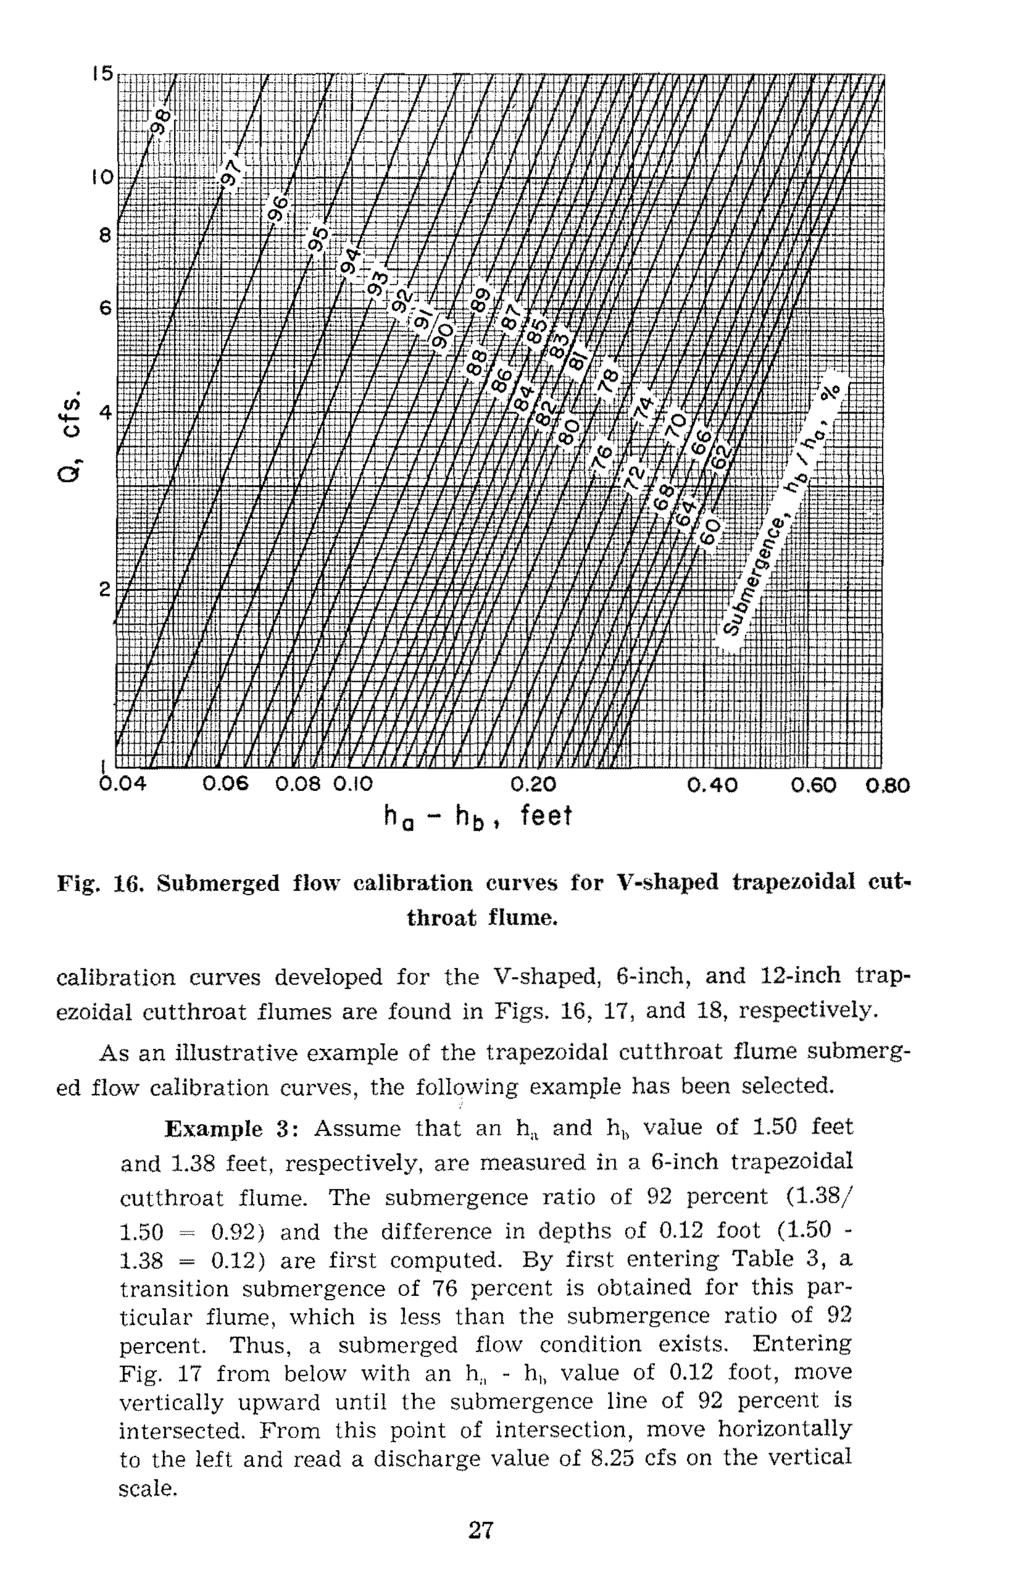 II) '+o 0.06 0.08 0.10 h hb t 0.20 feet 0.40 0.60 0.80 Fig. 16. Submerged flow clibrtion curves for V-shped trpezoidl cutthrot flume.